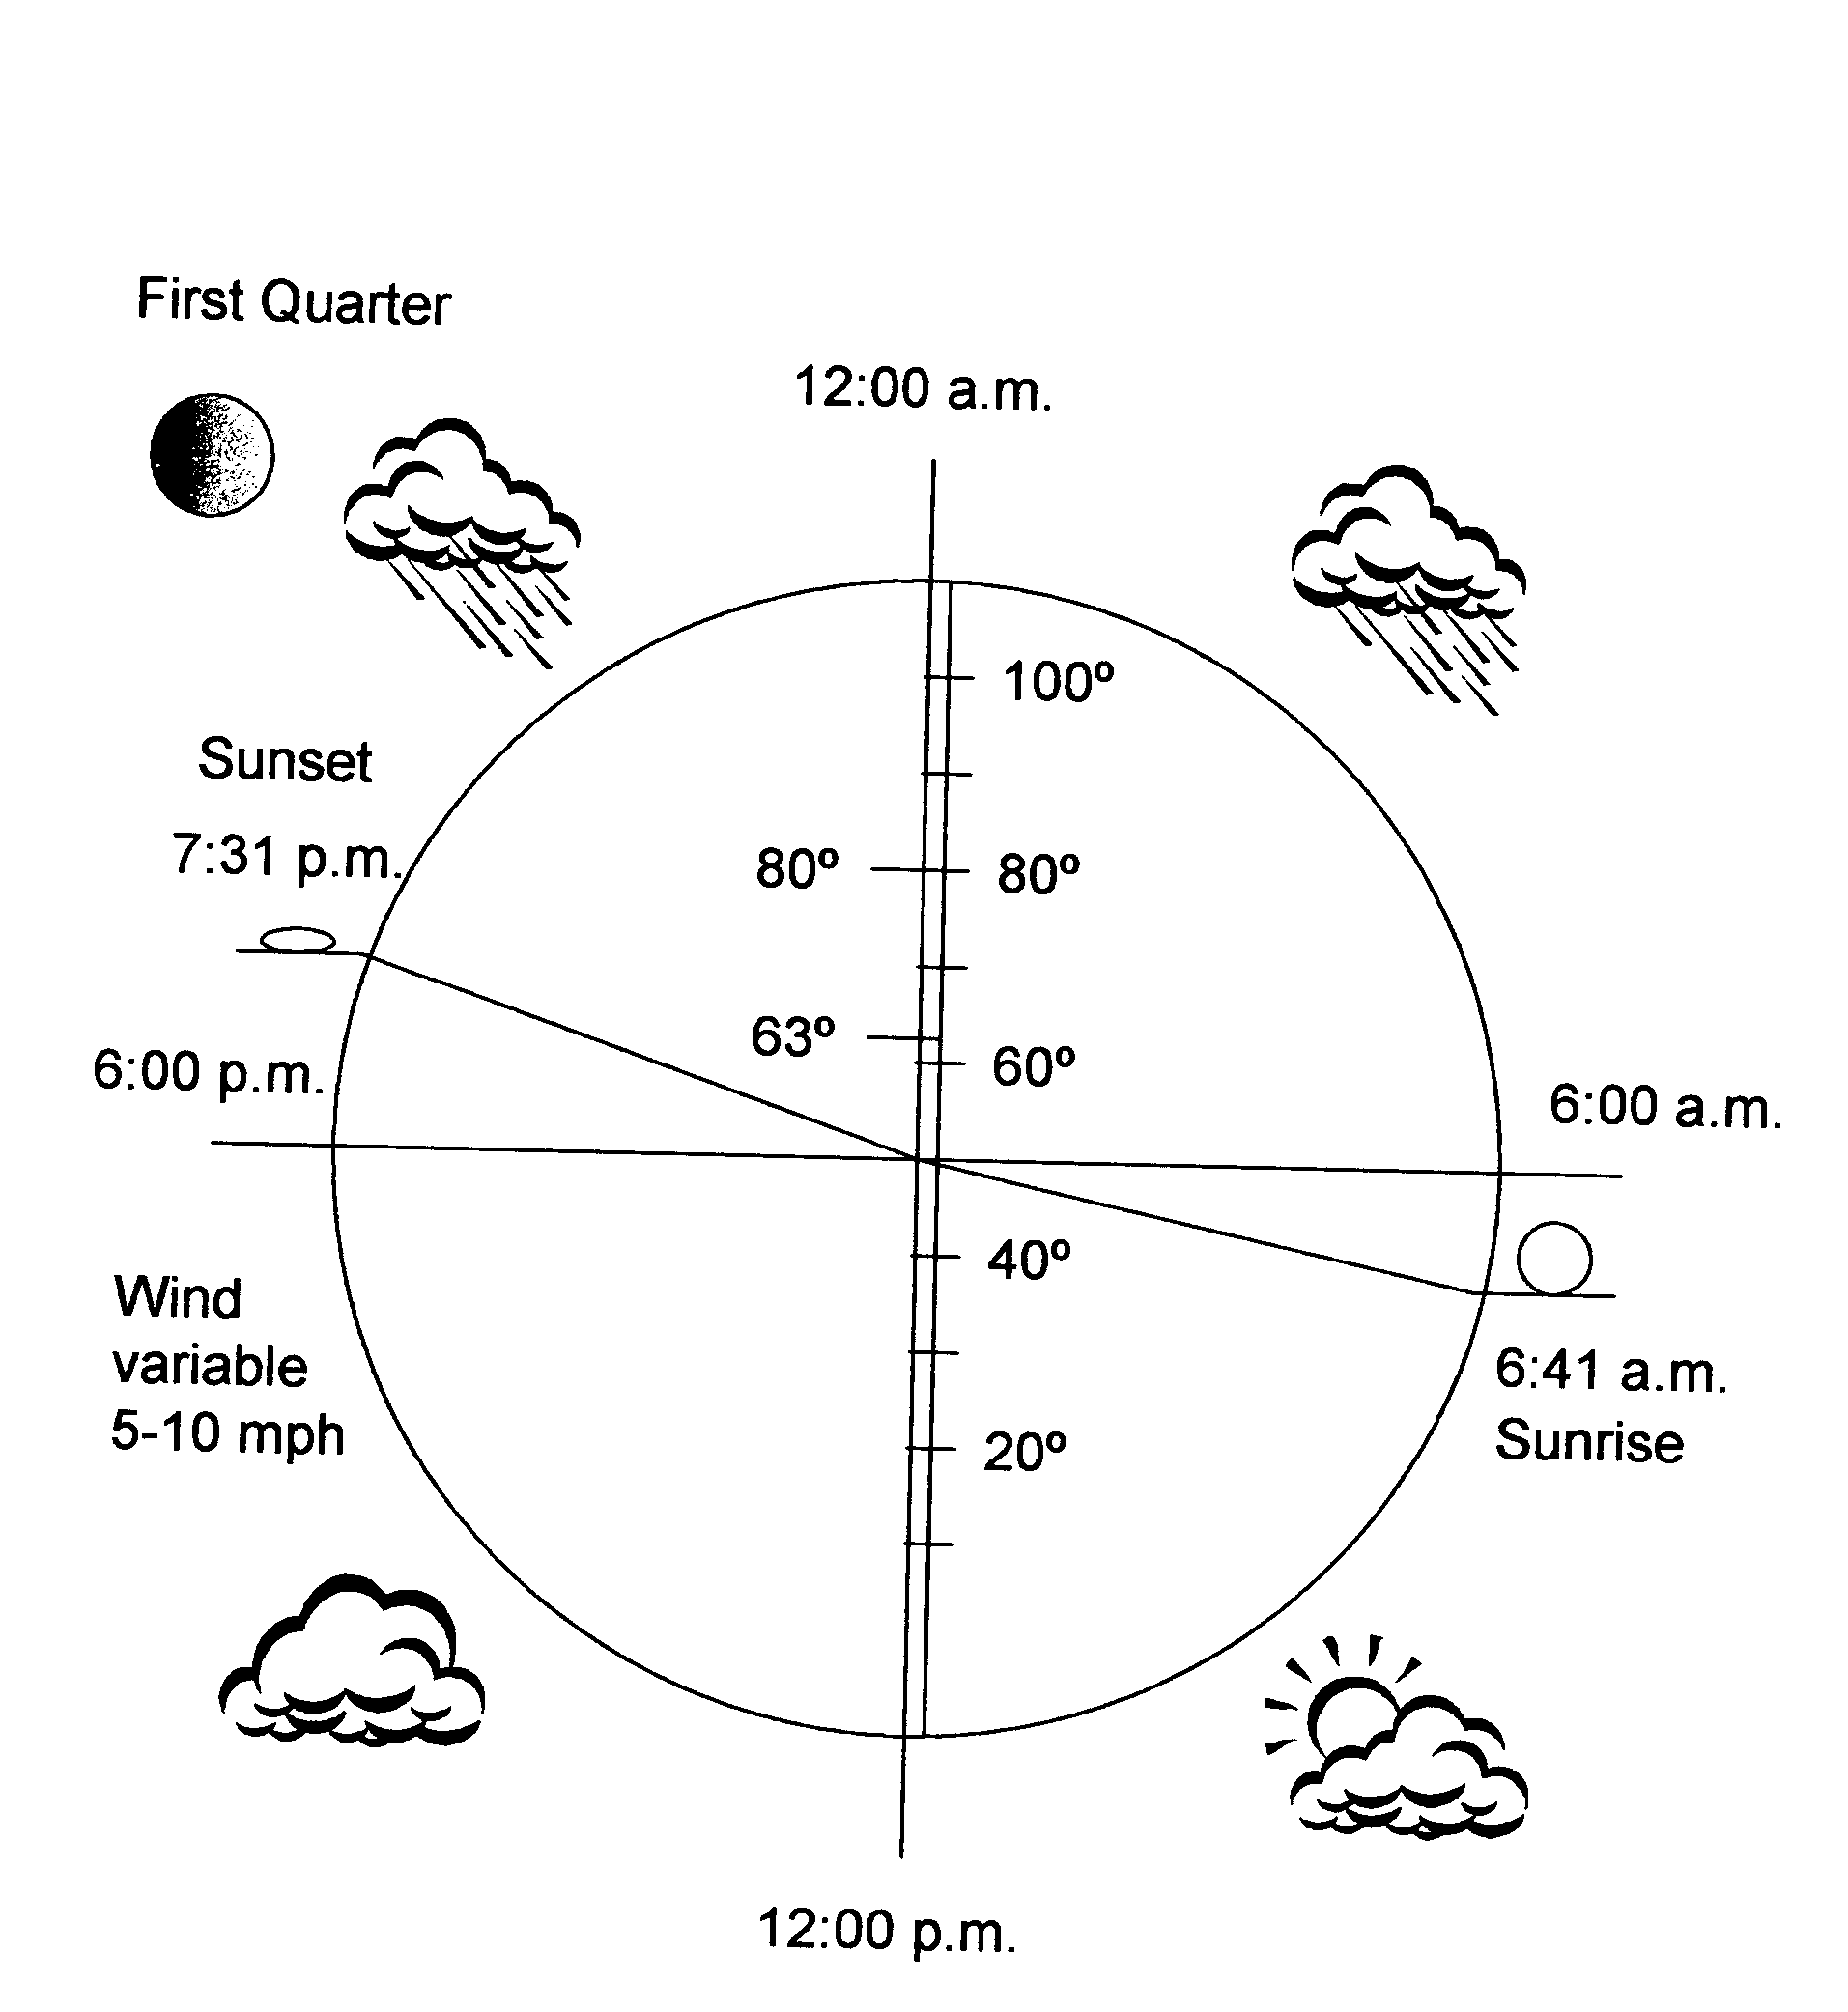 Weather dial